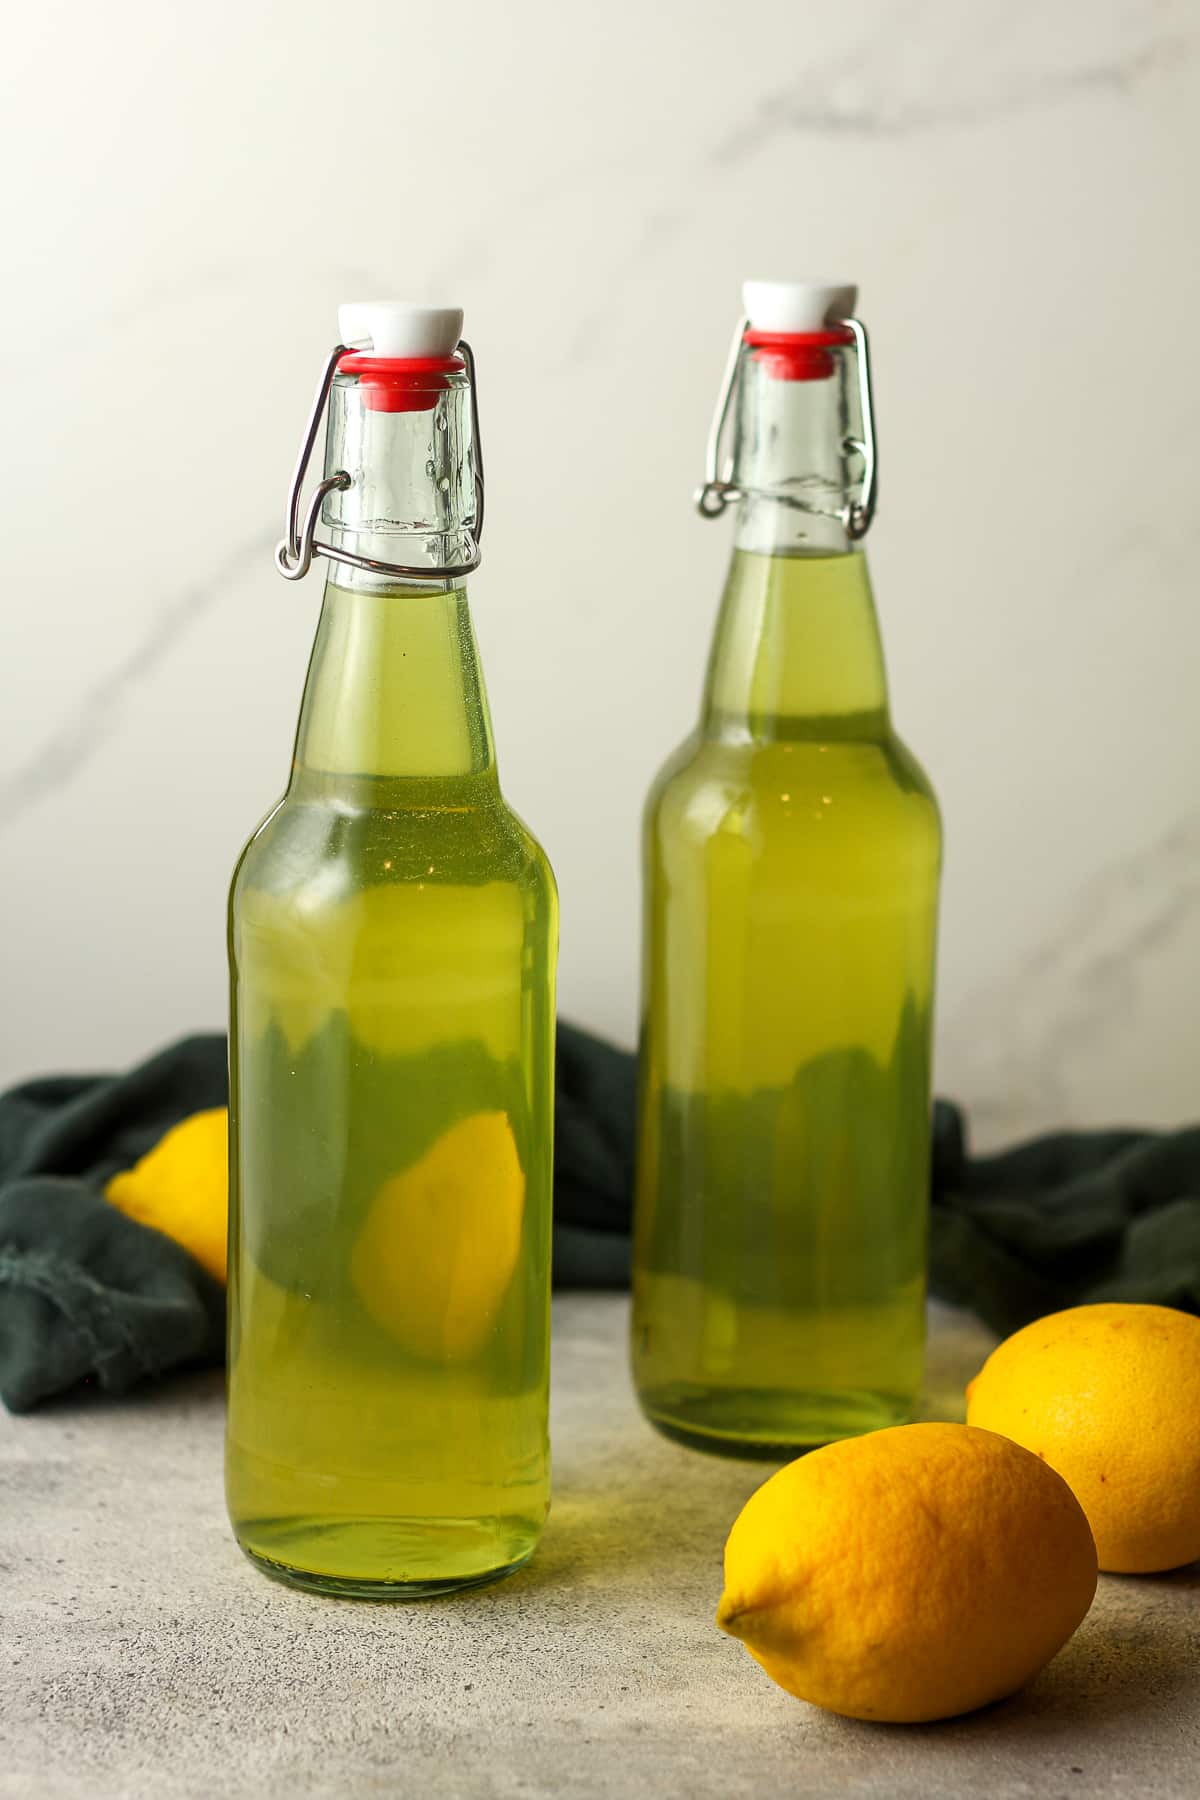 Two bottles of homemade limoncello.